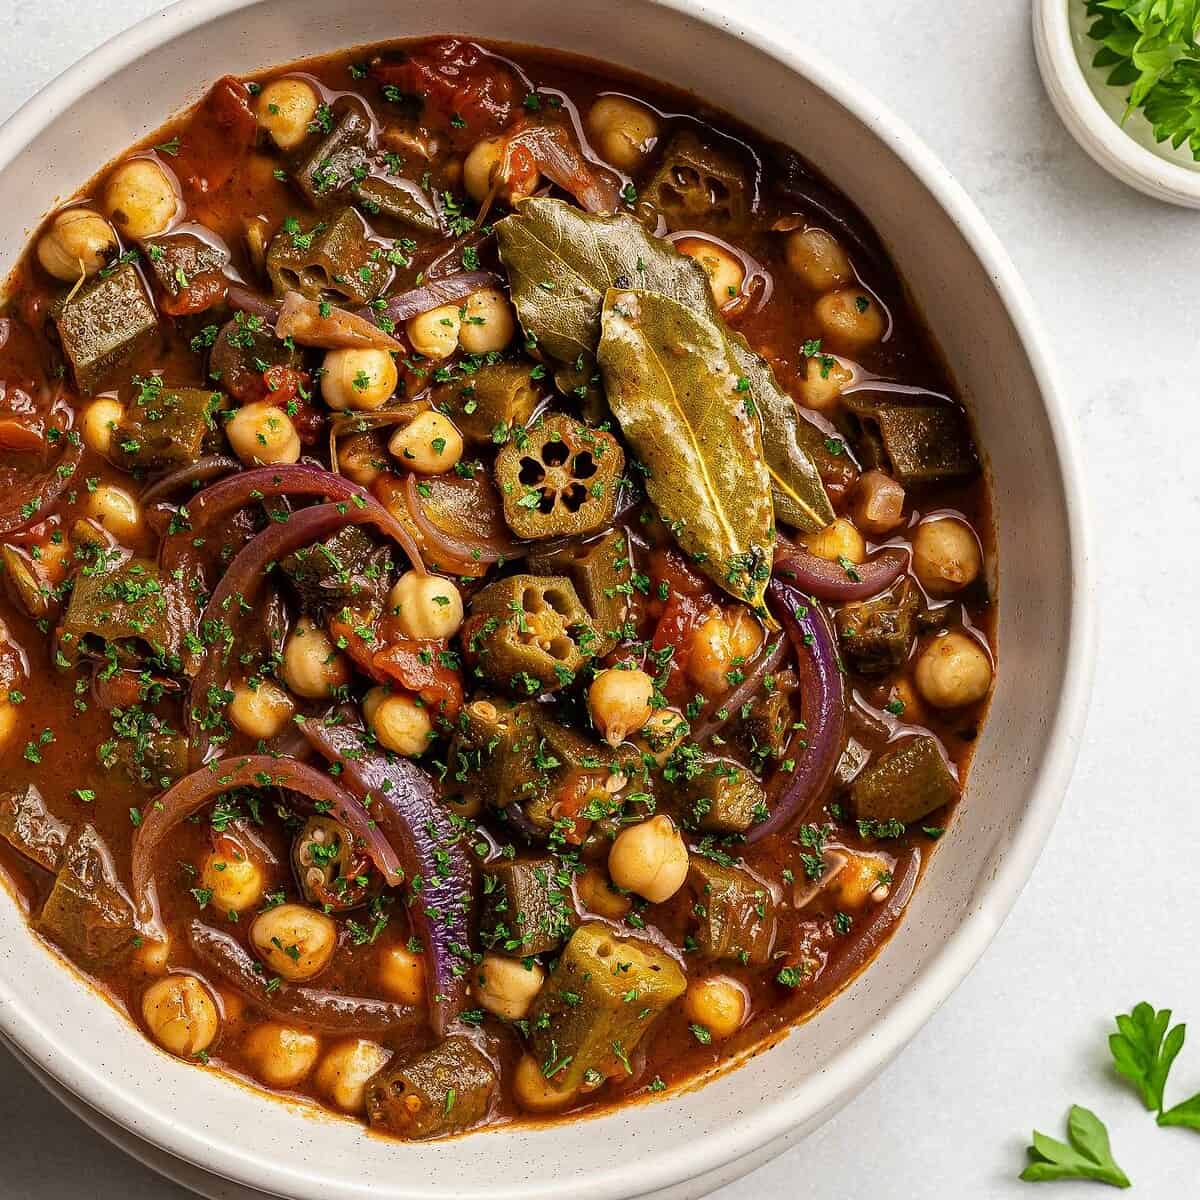  Who said vegetarian food can’t be hearty? Try this okra stew!